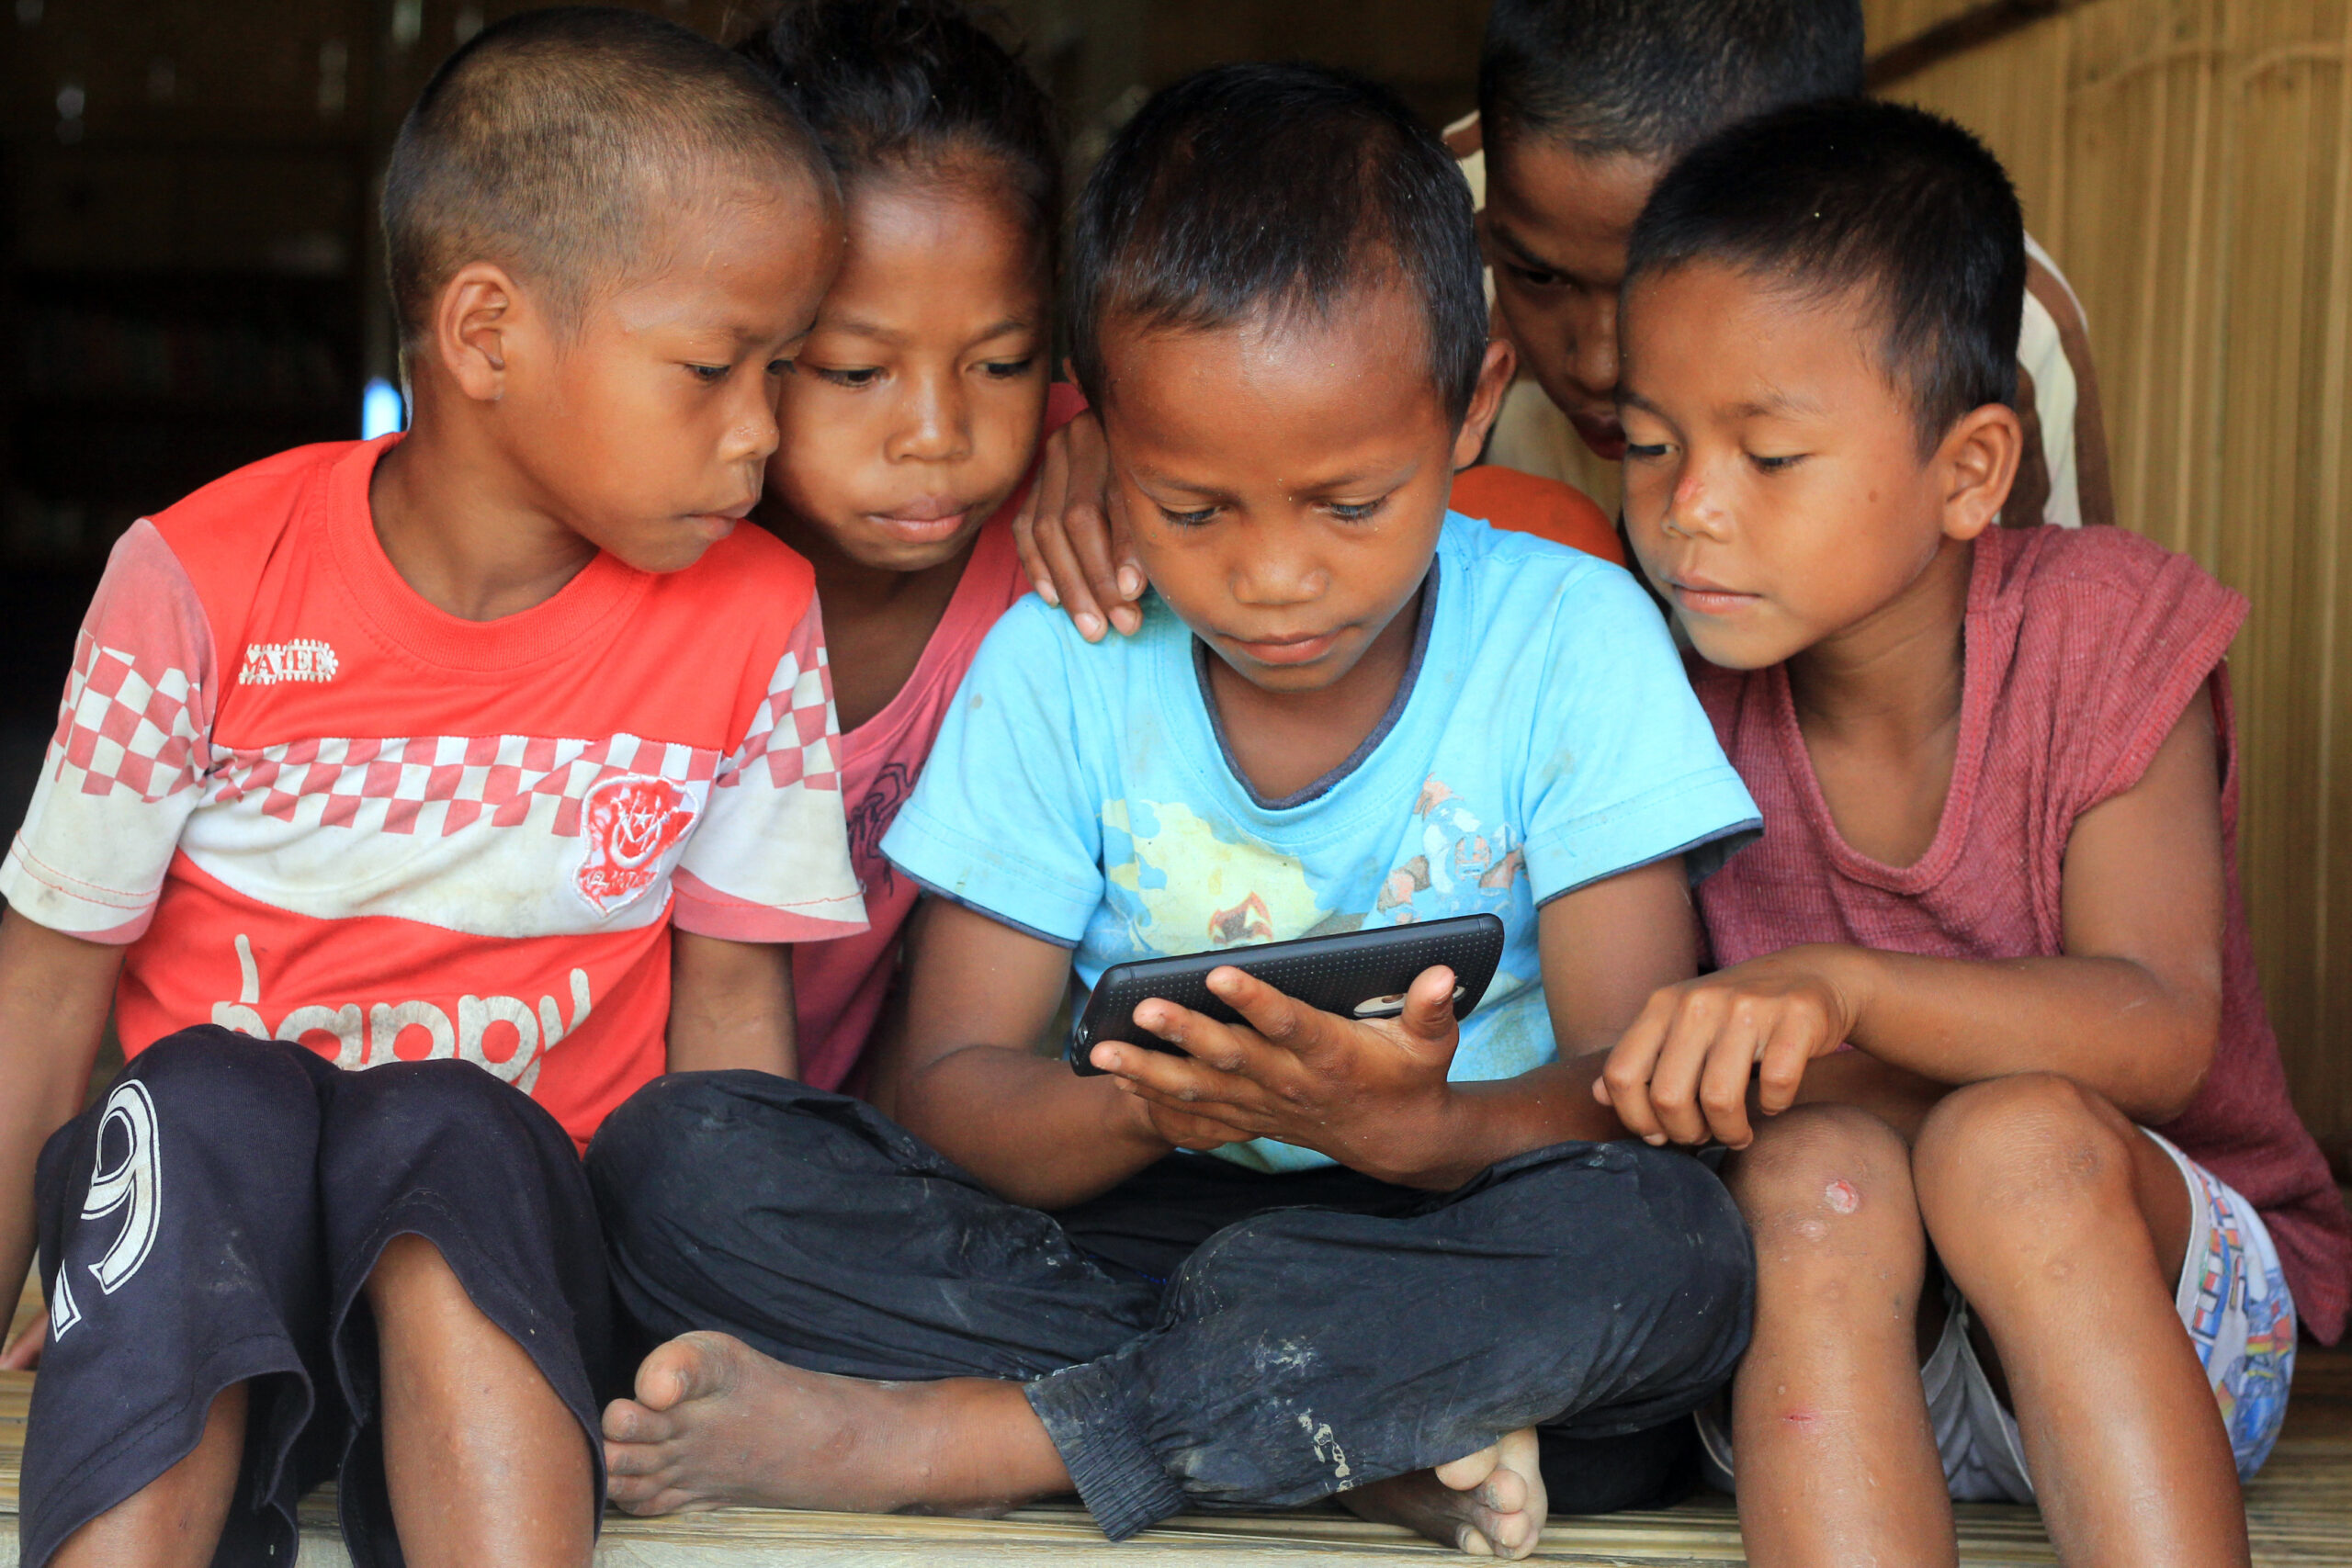 UPLIFT’s 1MillionDevices to Address Digital Poverty & Divide